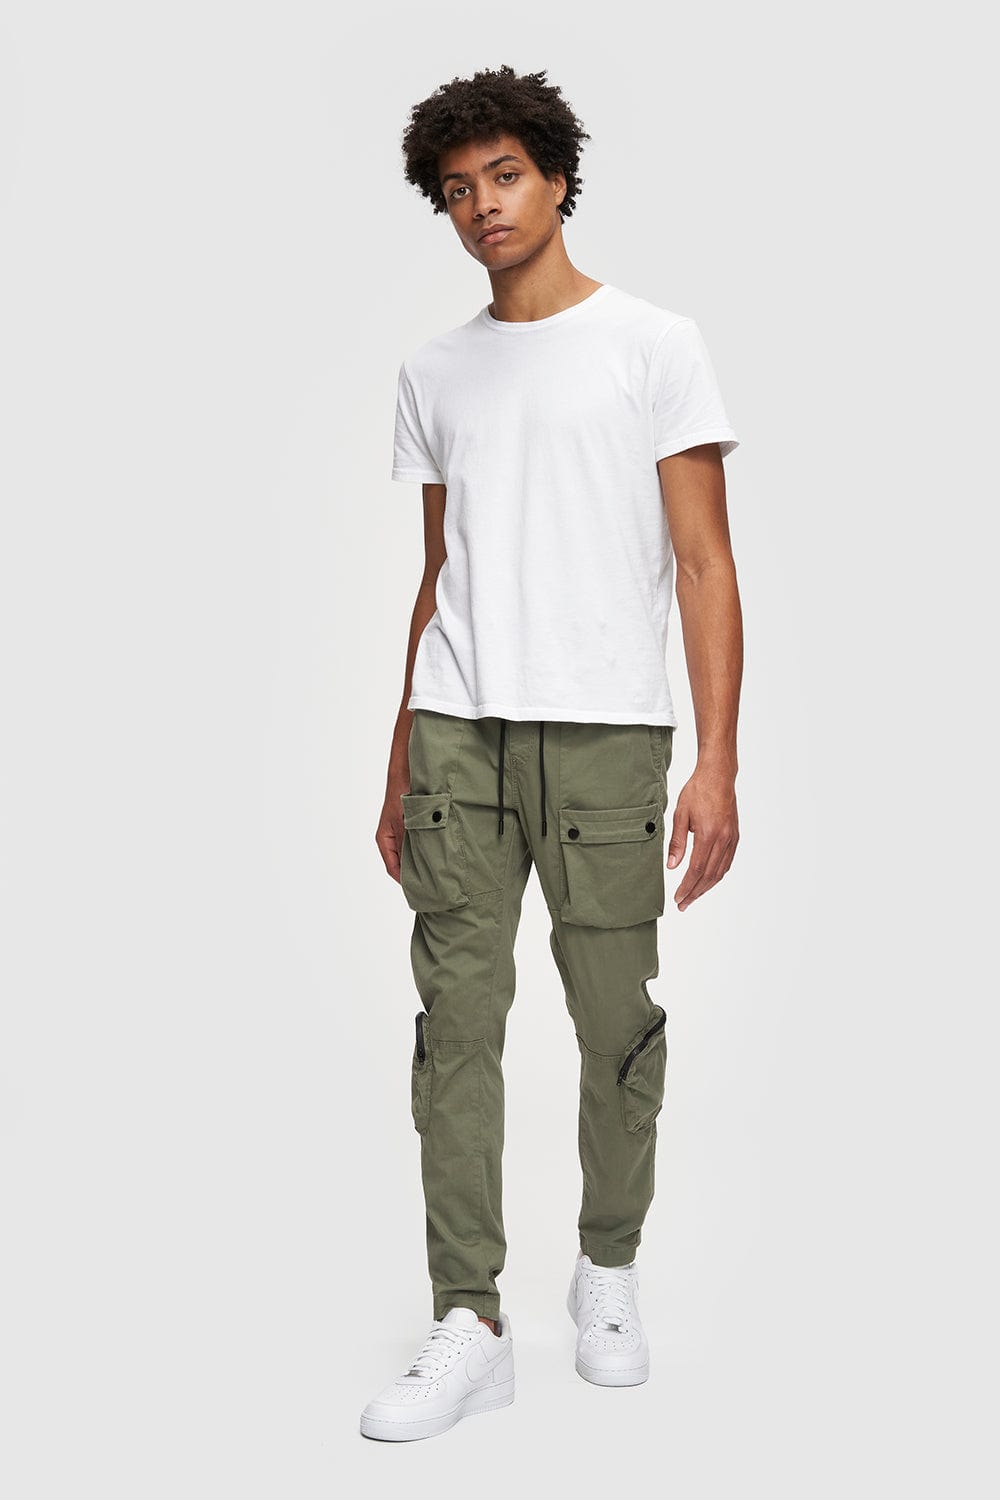 Foot Locker Canada - Tapered to perfection 👌 These Kuwalla, Tee Vintage  Cargo Pants are a must add to your rotation ↪️ 🛒